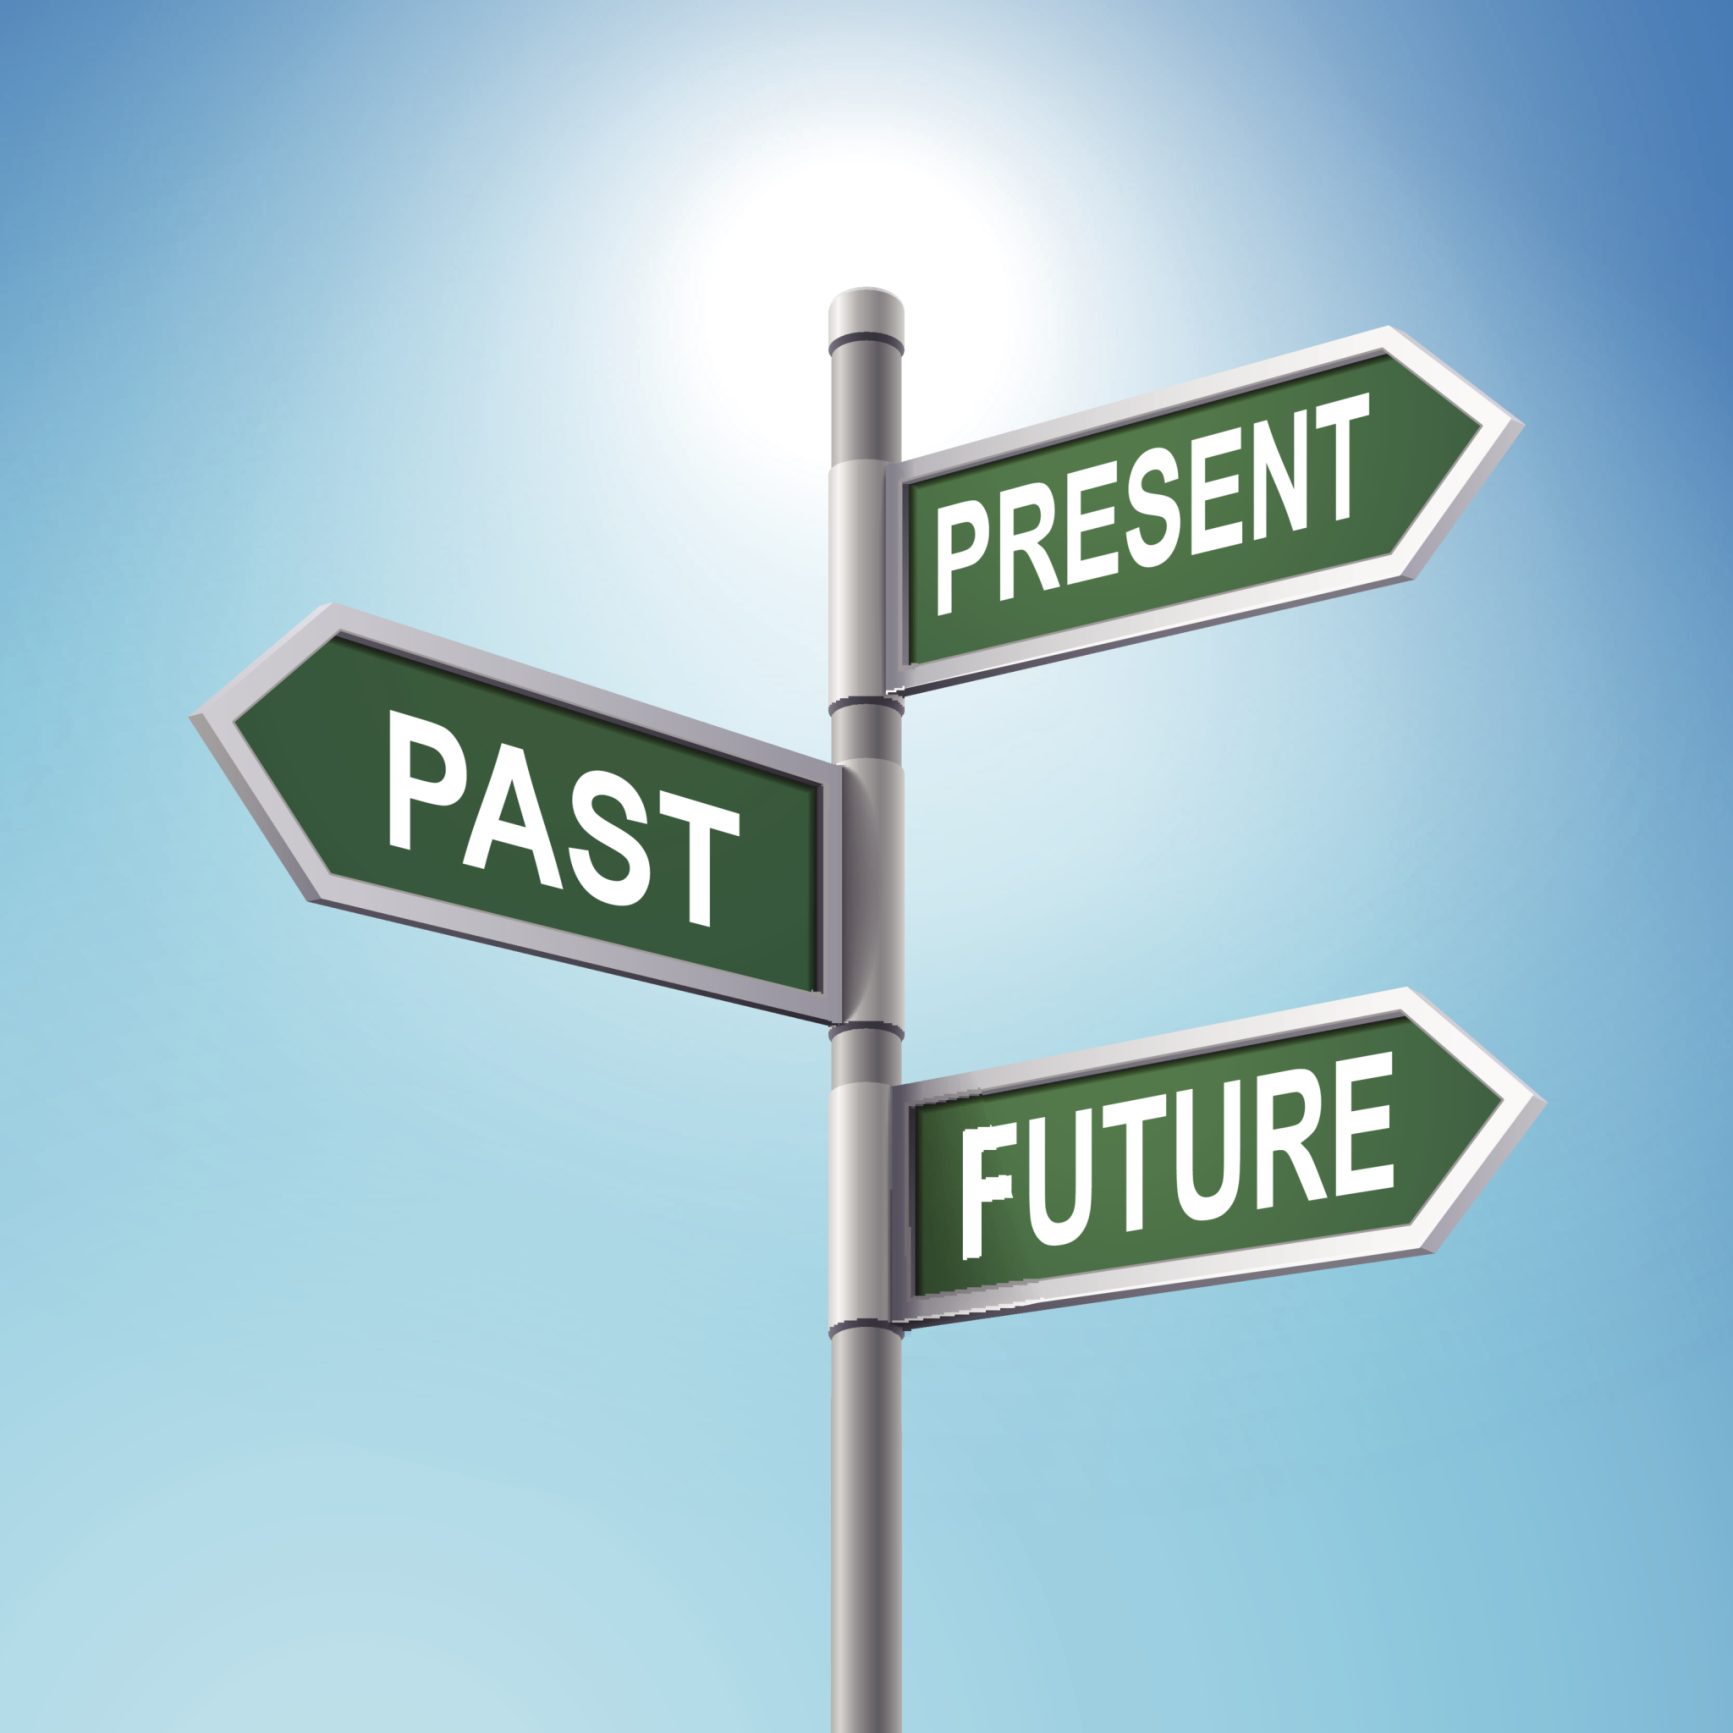 Past. Present. Future. What's your perspective?